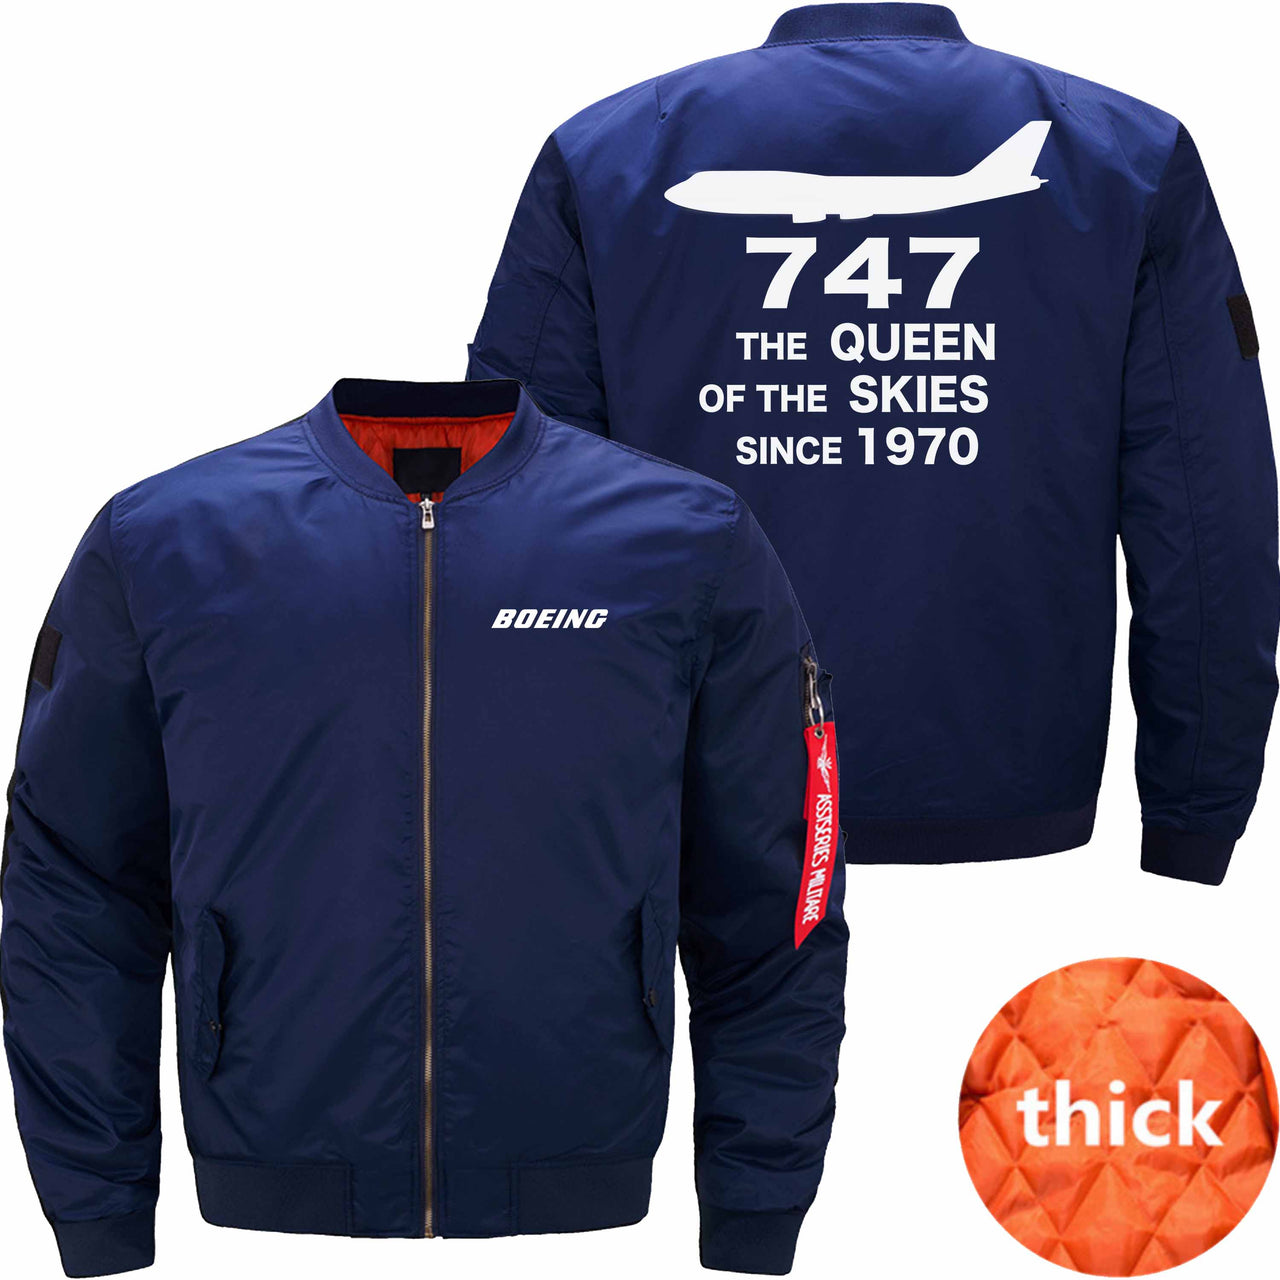 Boeing 747 THE QUEEN OF THE SKIES SINCE 1970 Ma-1 Bomber Jacket Flight Jacket Aviator Jacket THE AV8R